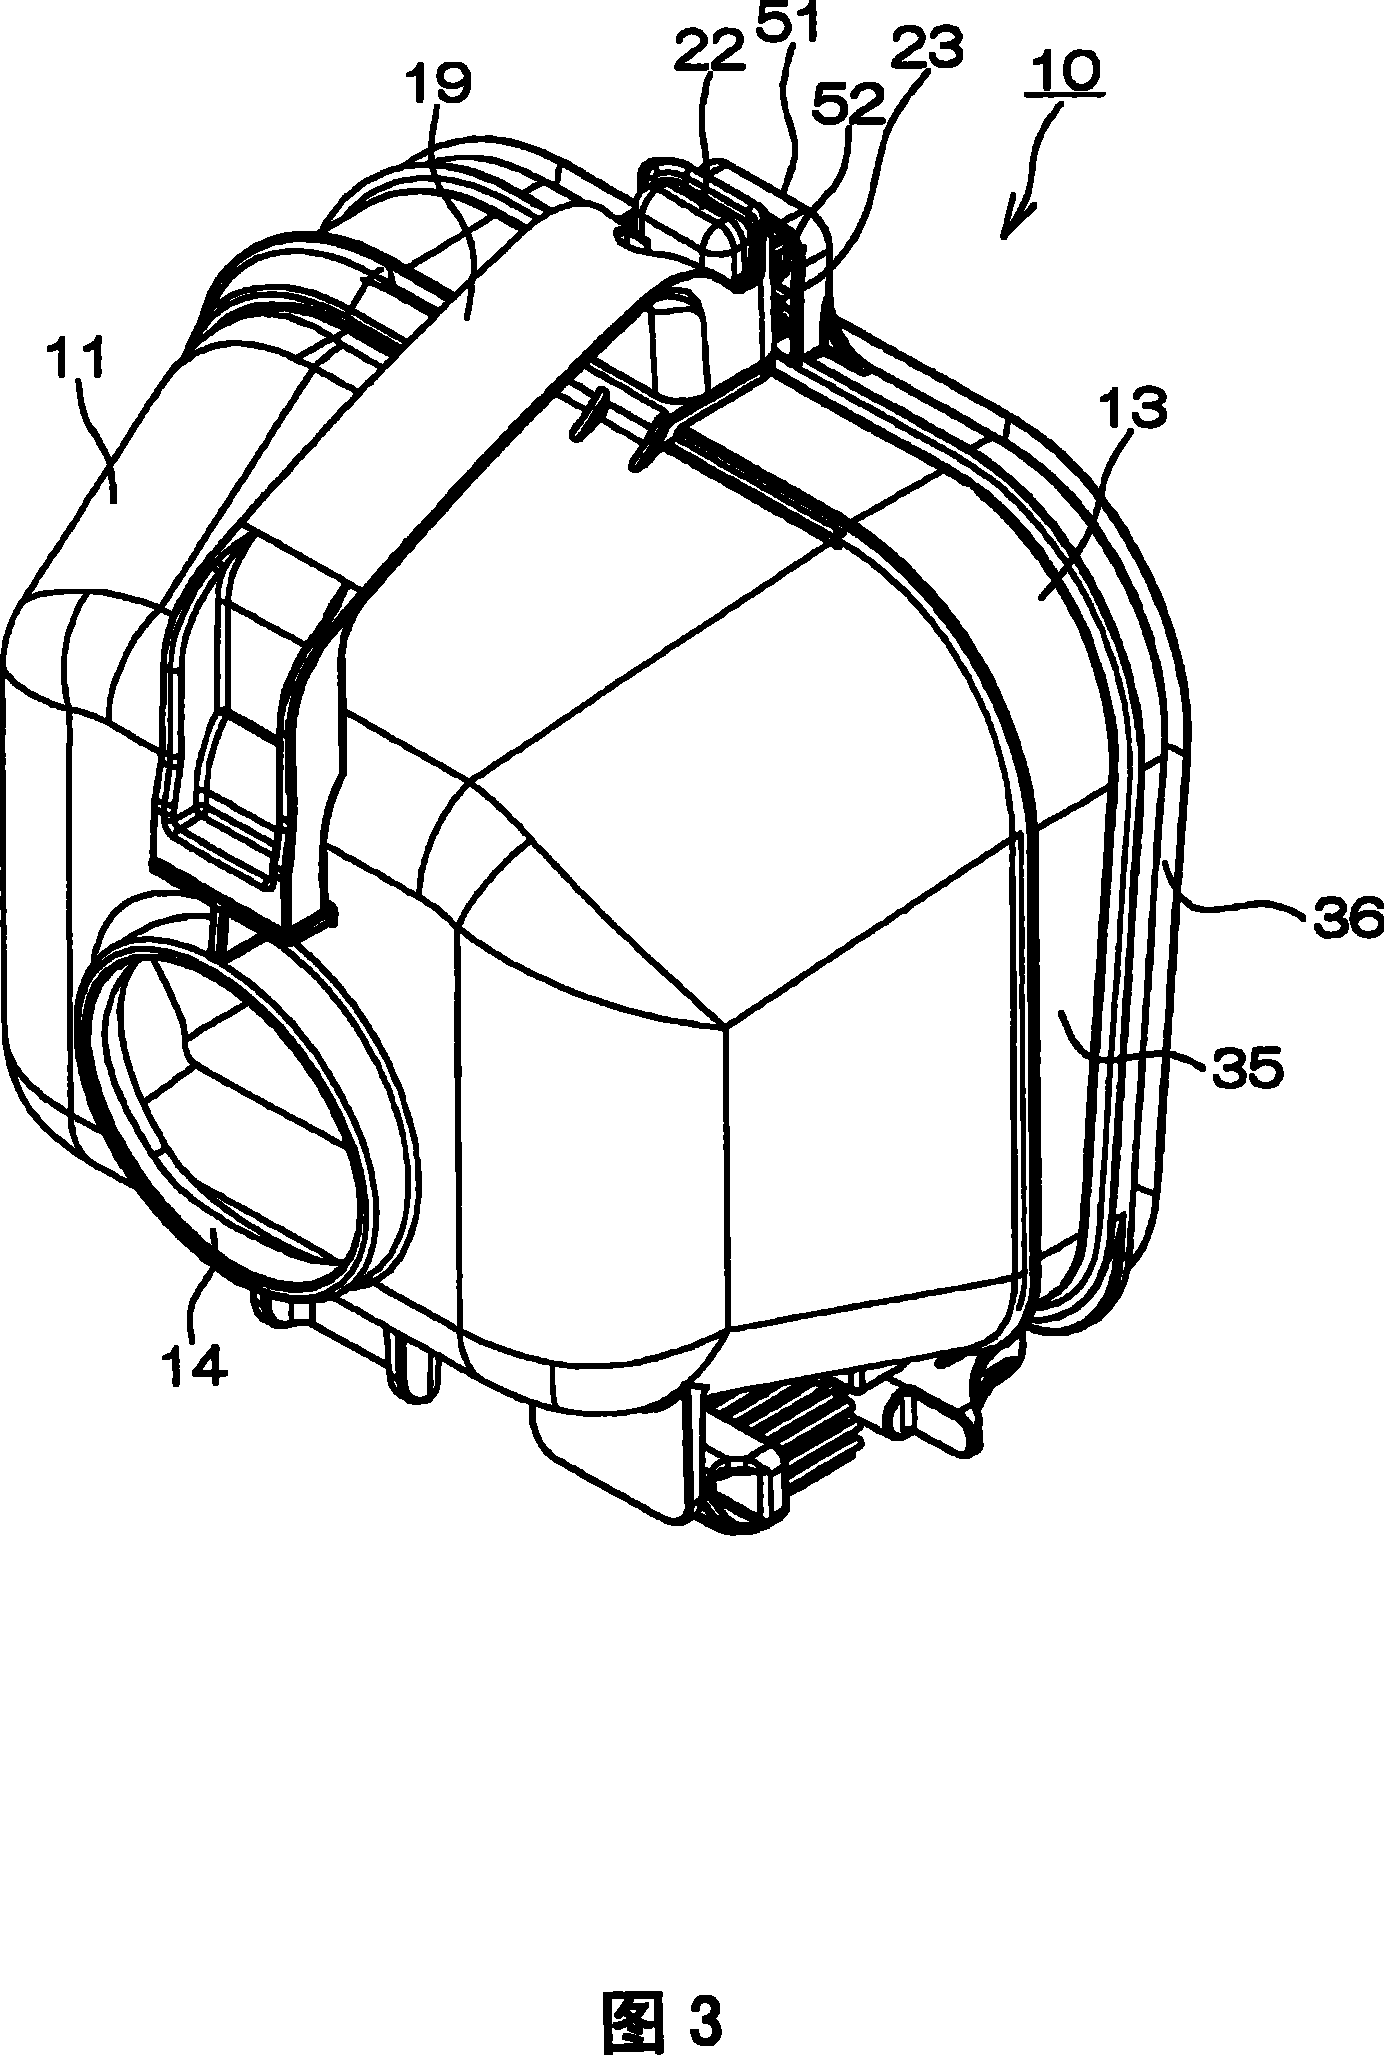 Dust collecting container for electric vacuum cleaner